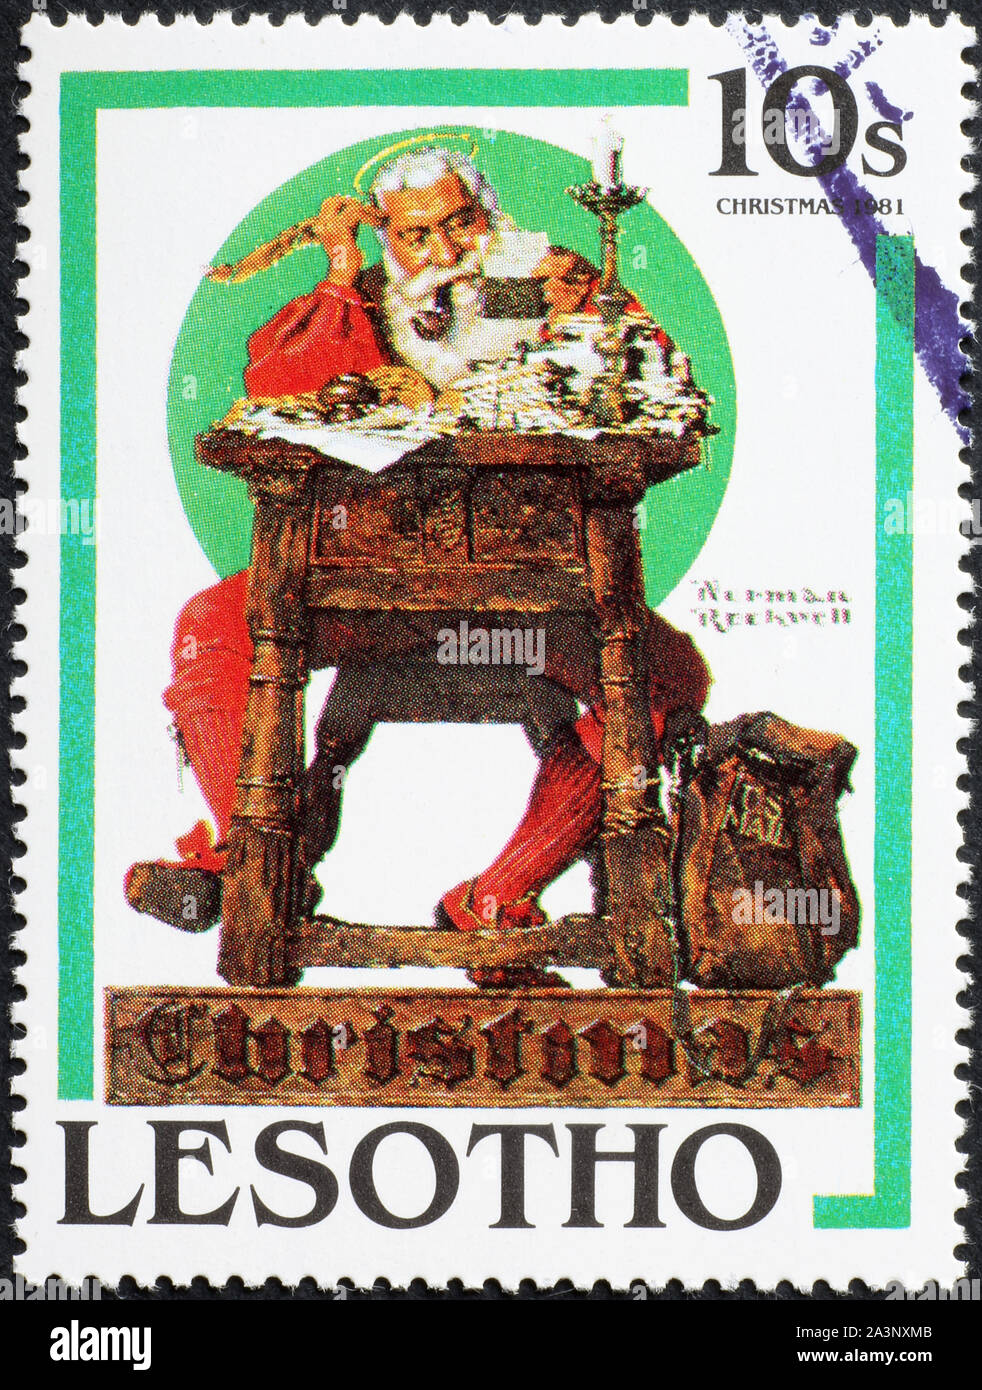 Santa Claus reading letters on stamp, illustration by Norman Rockwell Stock Photo